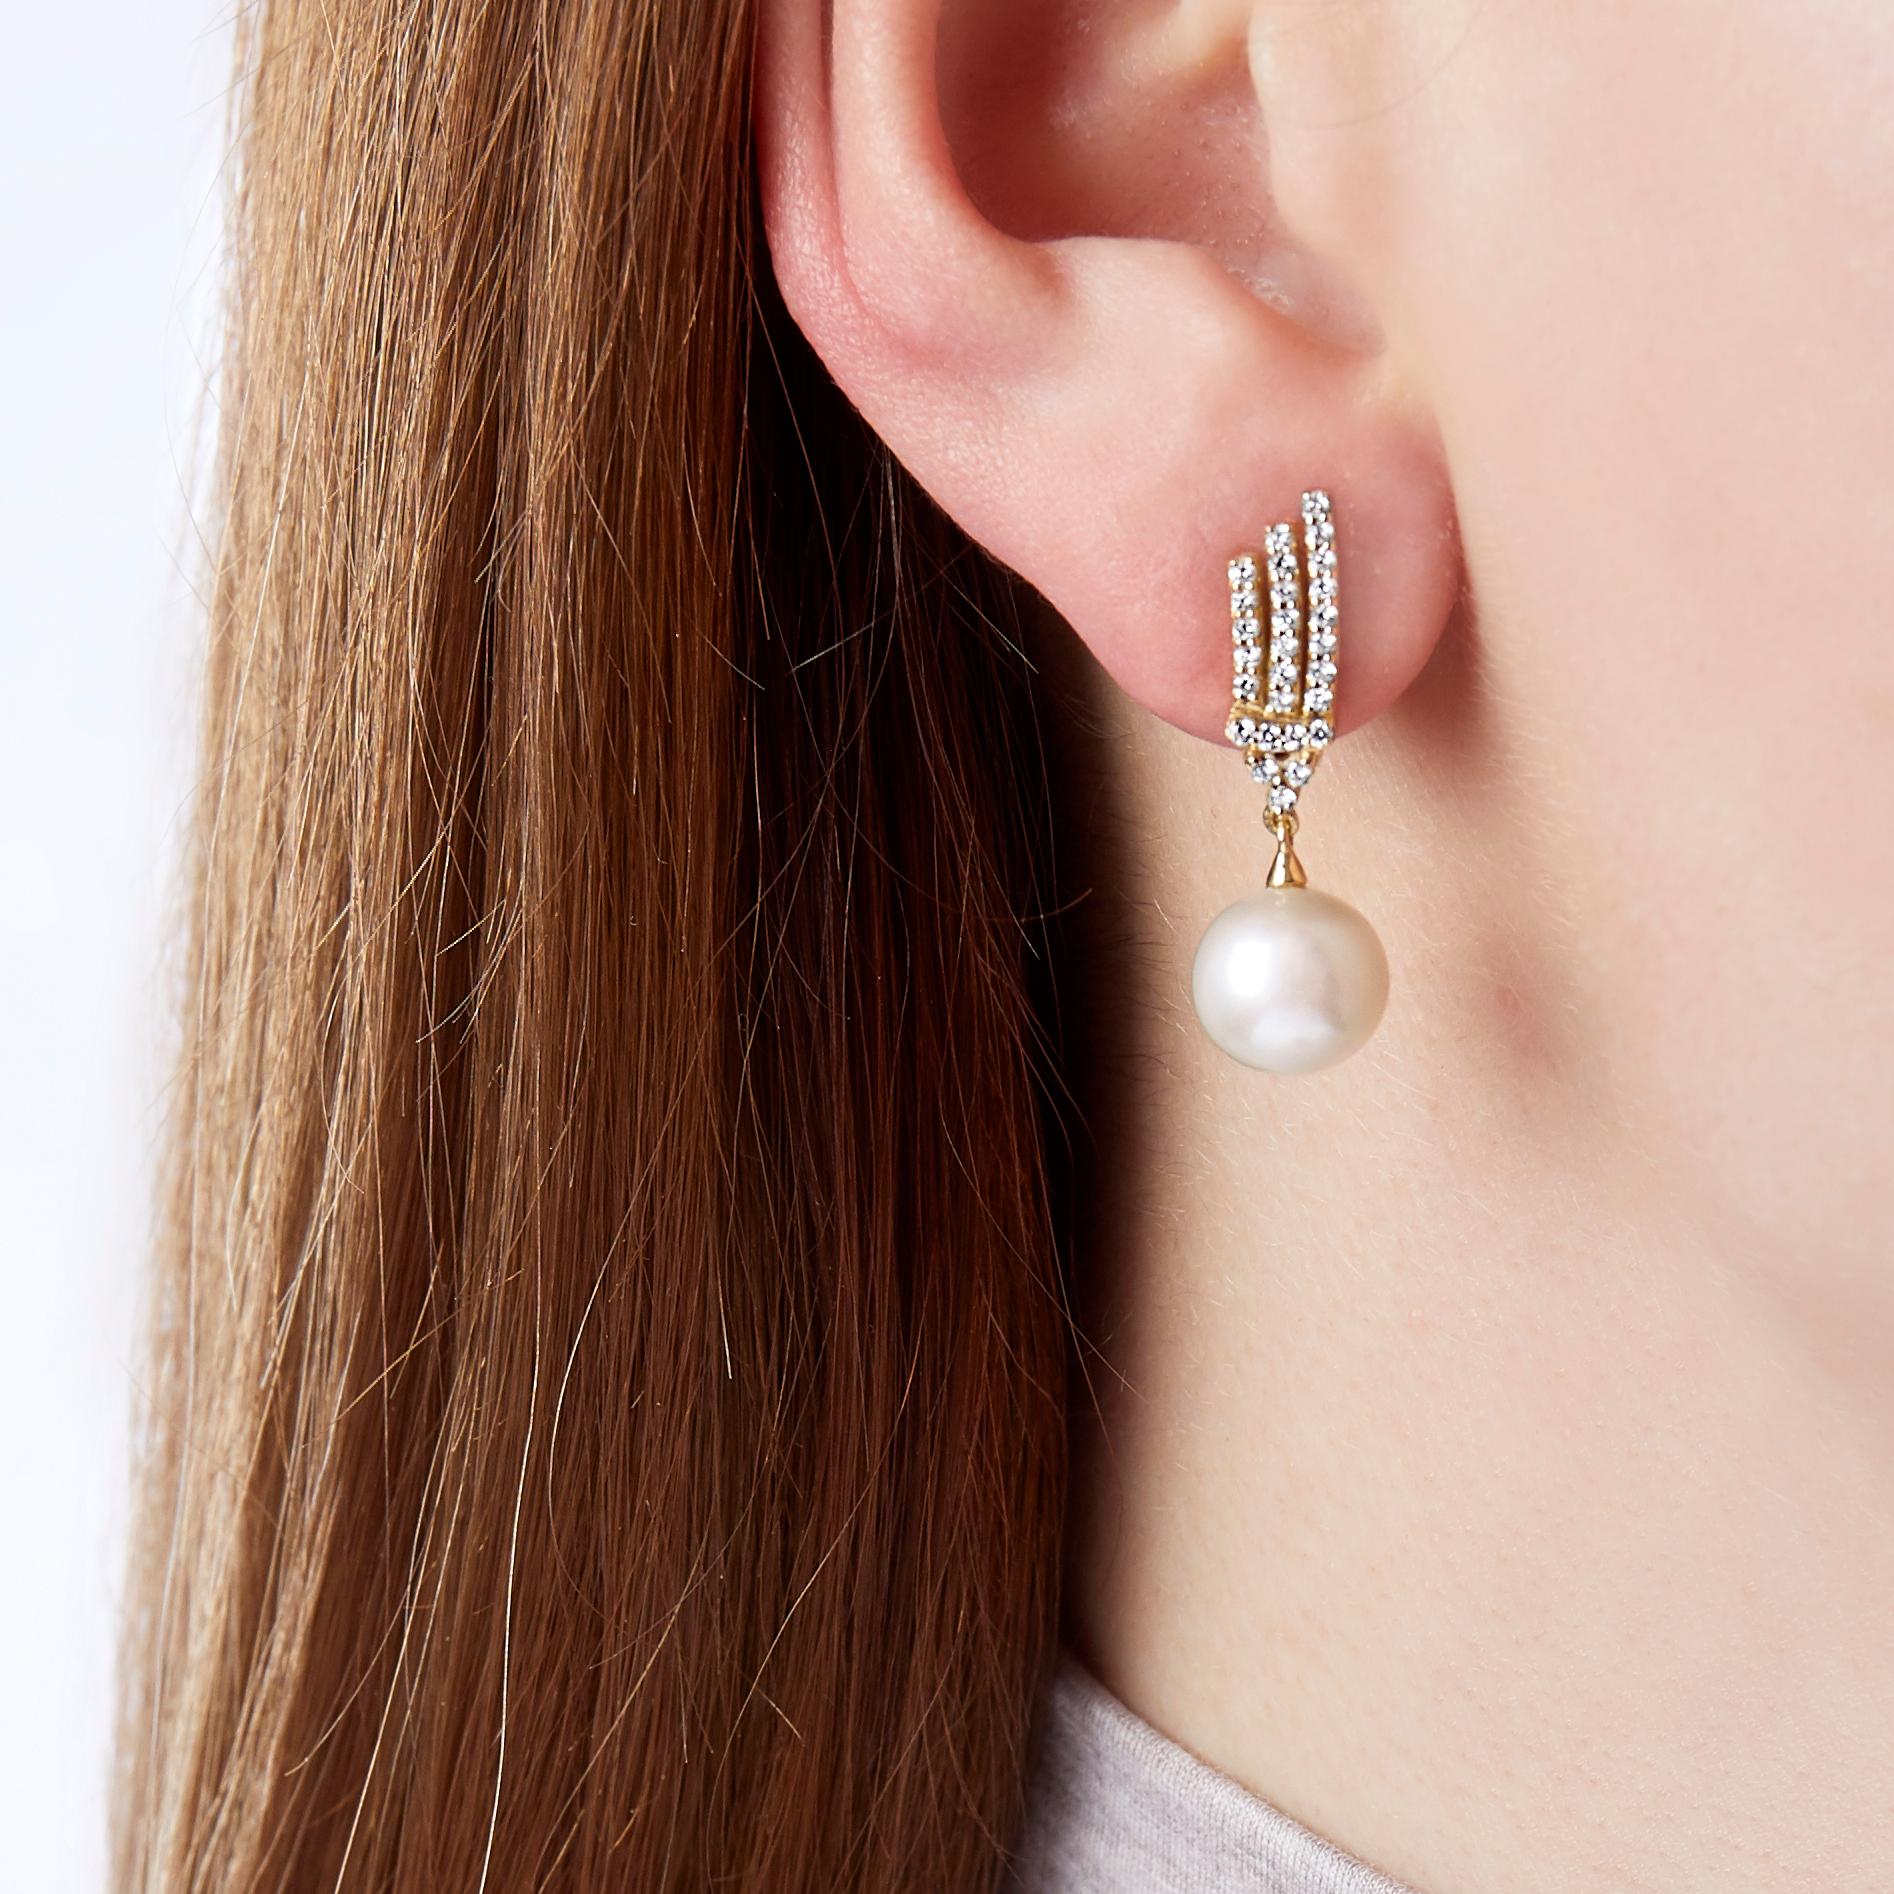 These elegant earrings by Yoko London feature luminous Freshwater pearls beneath an intricate diamond design. Set in 18 Karat yellow gold, these earrings are reminisicent of the Art Deco earring and have been expertly handcrafted in our London